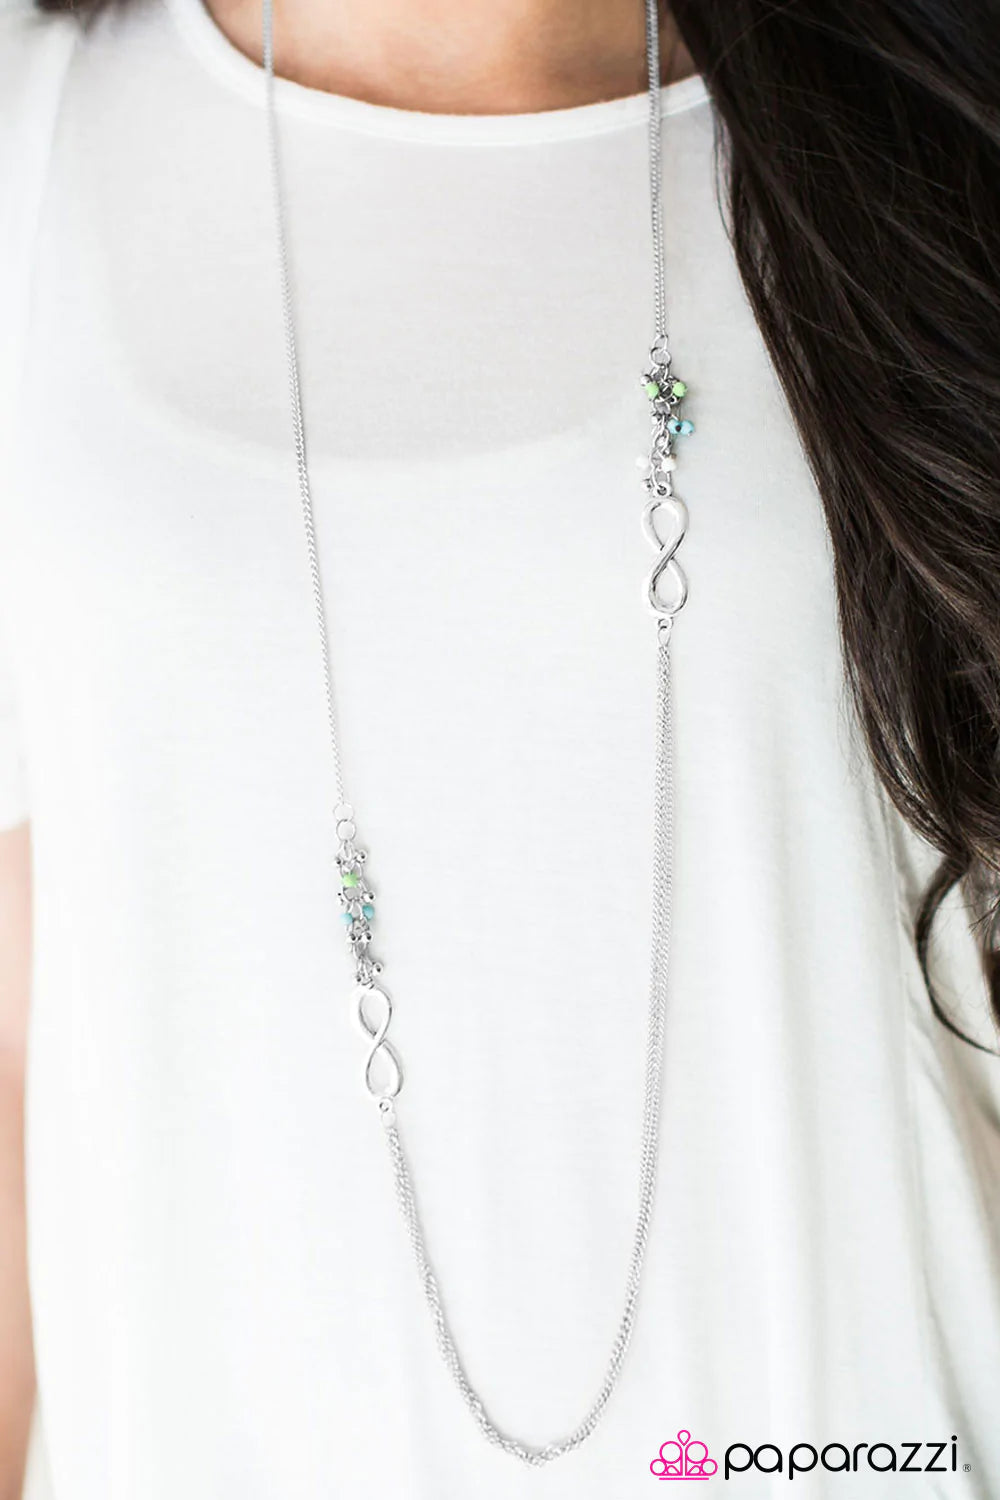 Paparazzi Necklace ~ Endlessly Entwined - Multi